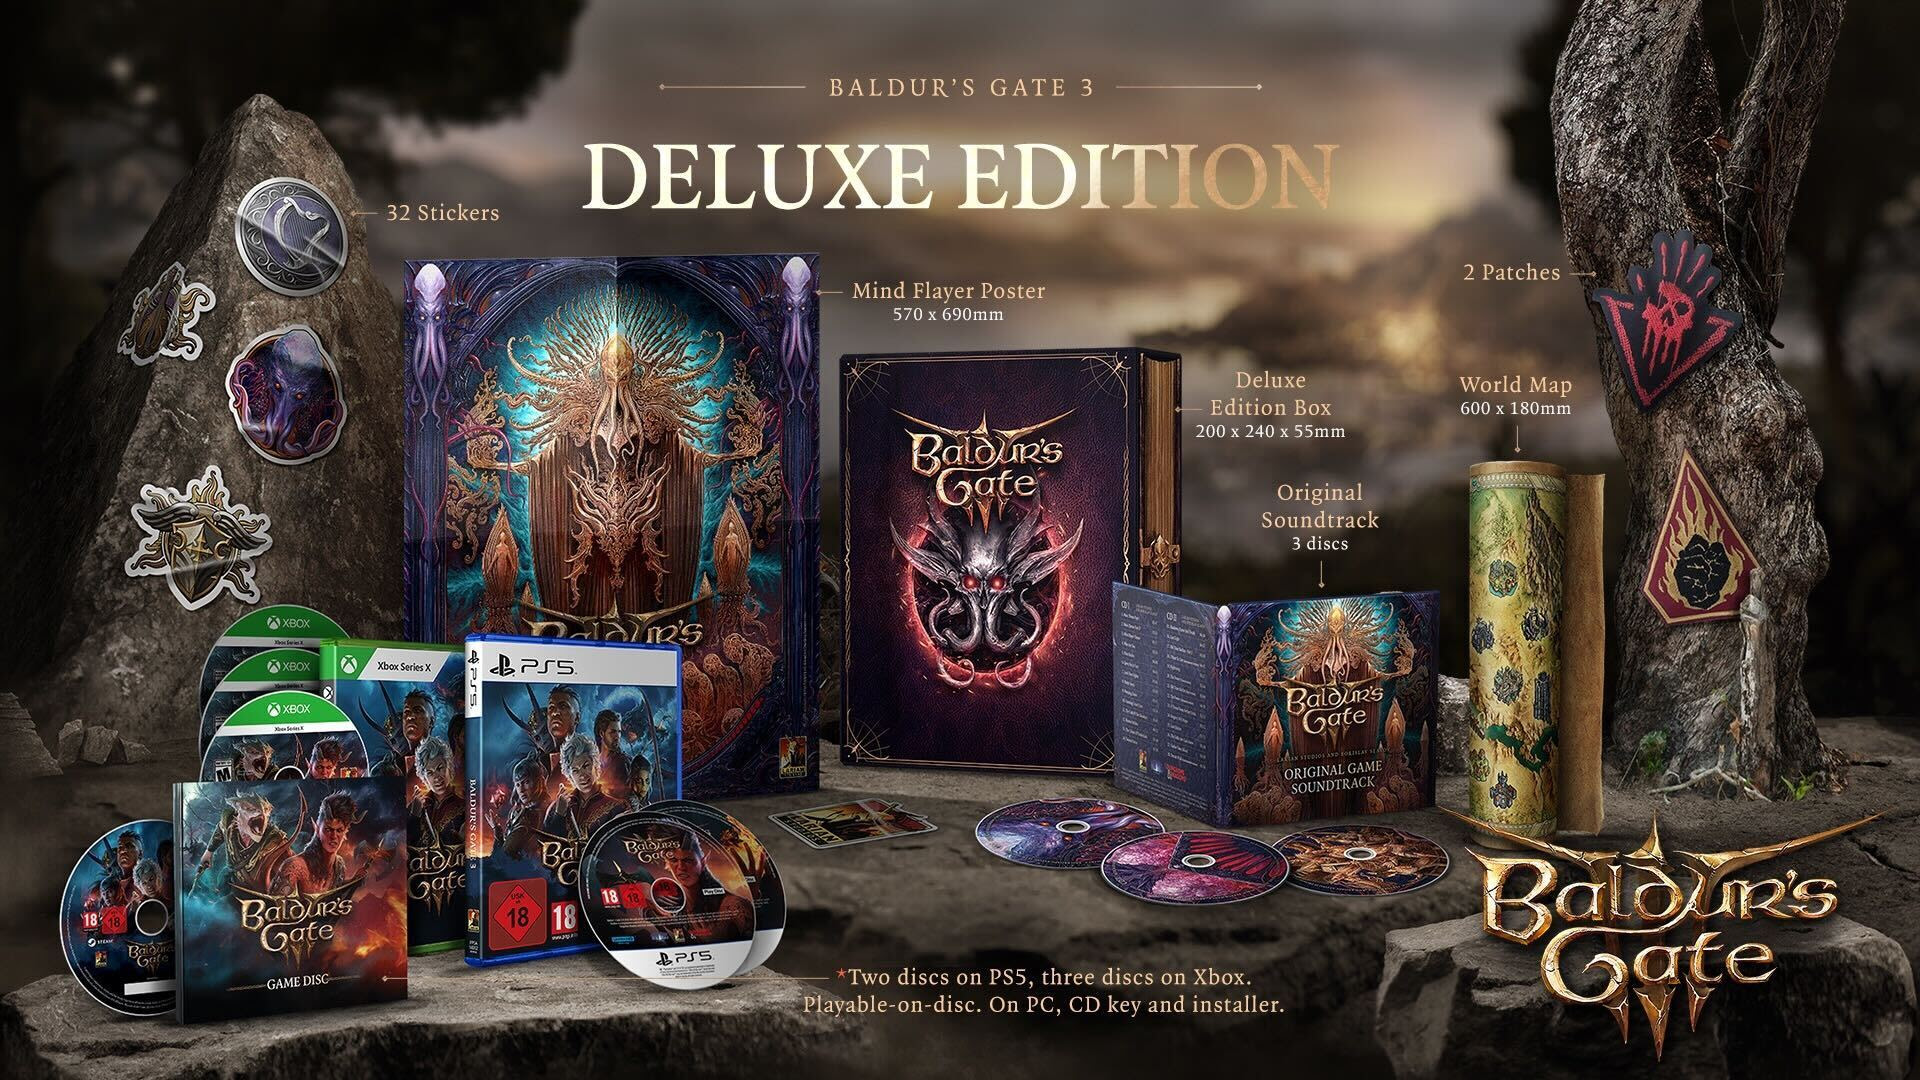 Baldur's Gate 3 Deluxe Edition components, such as a world map and poster